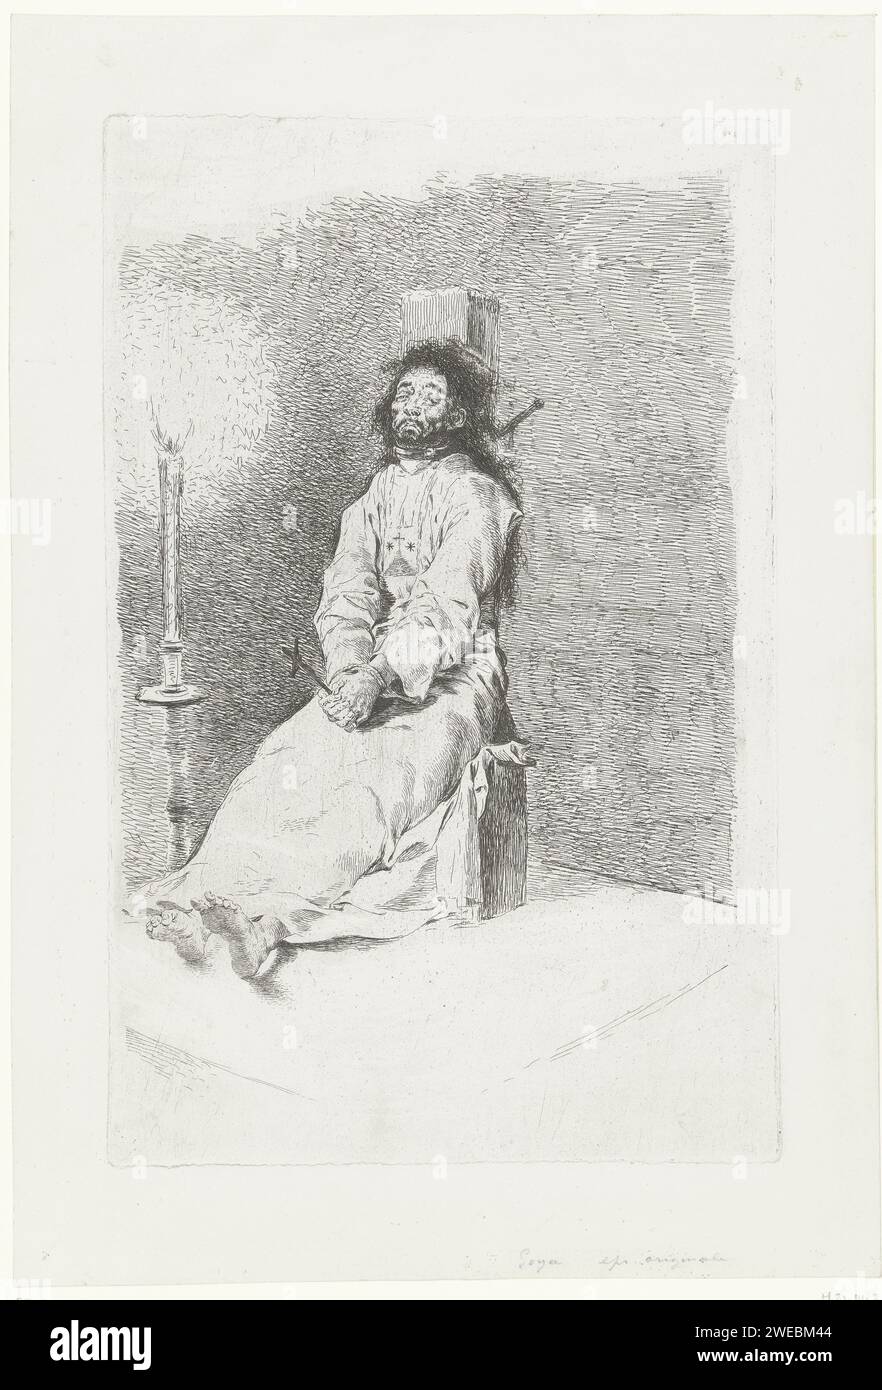 Executed to the strangle pole, Francisco de Goya, 1828 - 1832 print A man dressed in a habit of the unshoesed Carmelites, on the strangulation pole. He holds a crucifix in his hands. Spain paper etching violent death by strangling. instruments of torture, execution or punishment (with NAME) Stock Photo